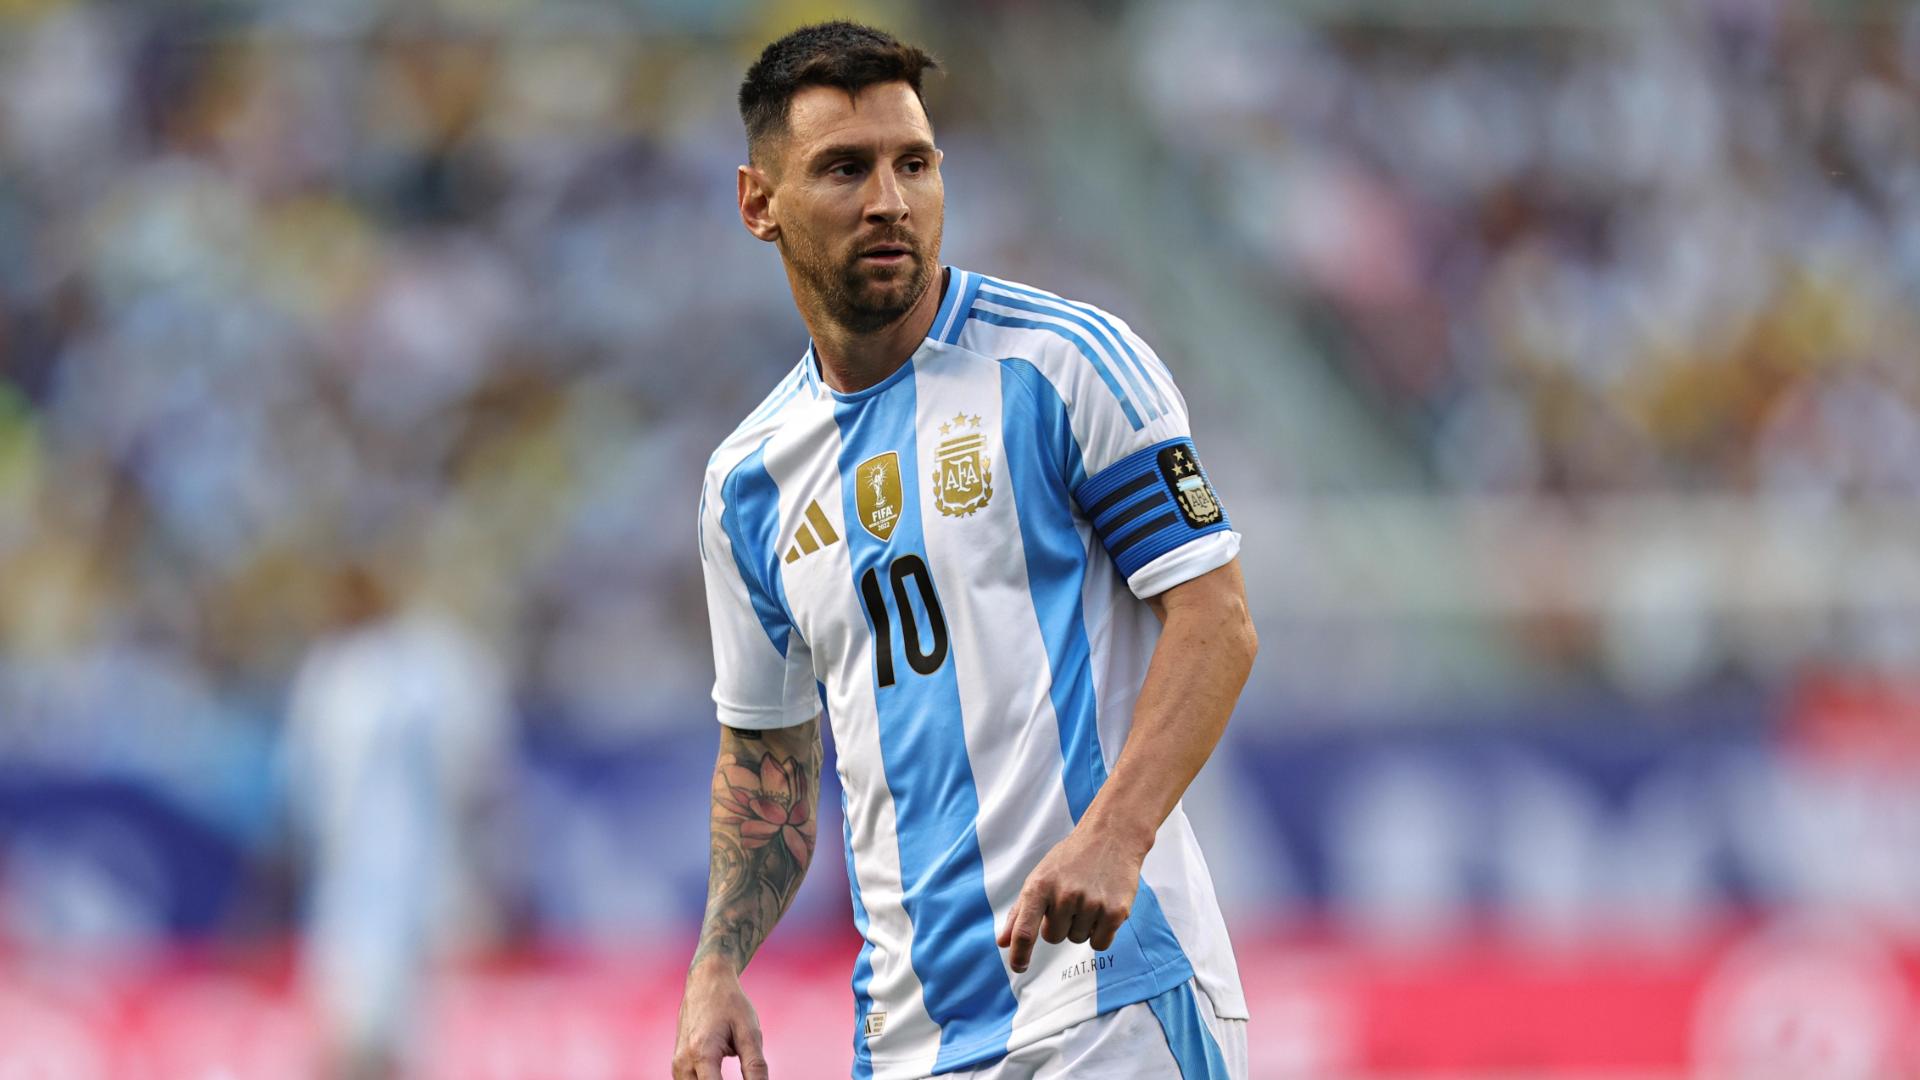 Messi pulls out of Argentina's Olympic squad